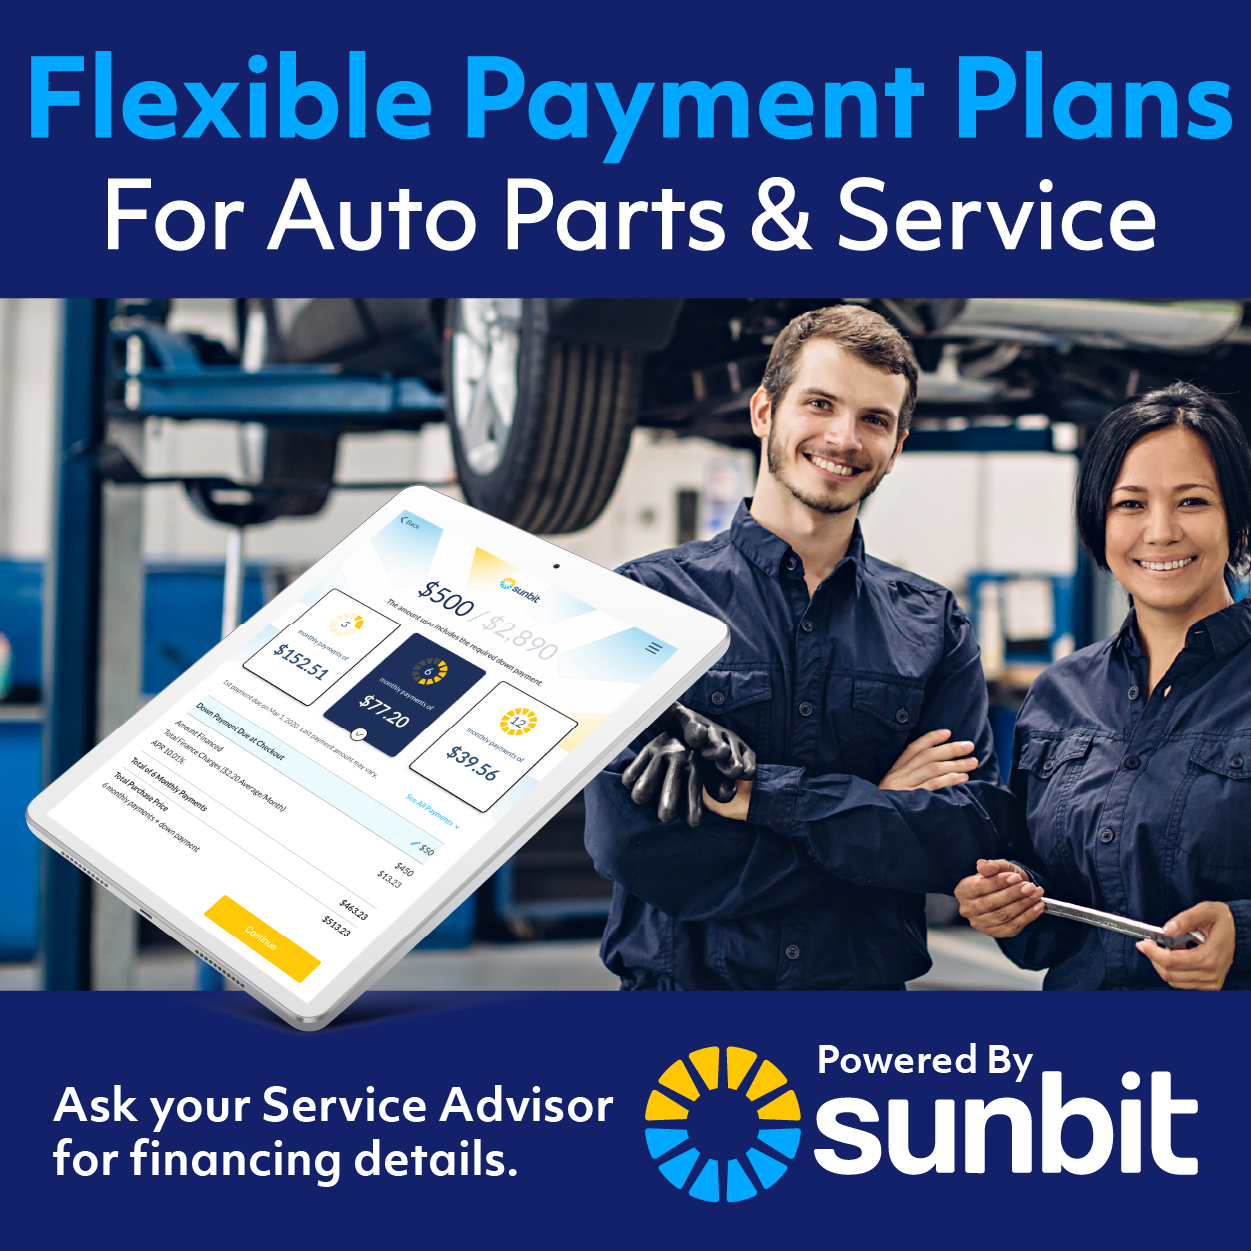 Flexible Service Payment Plans Available at Allen Honda powered by Sunbit